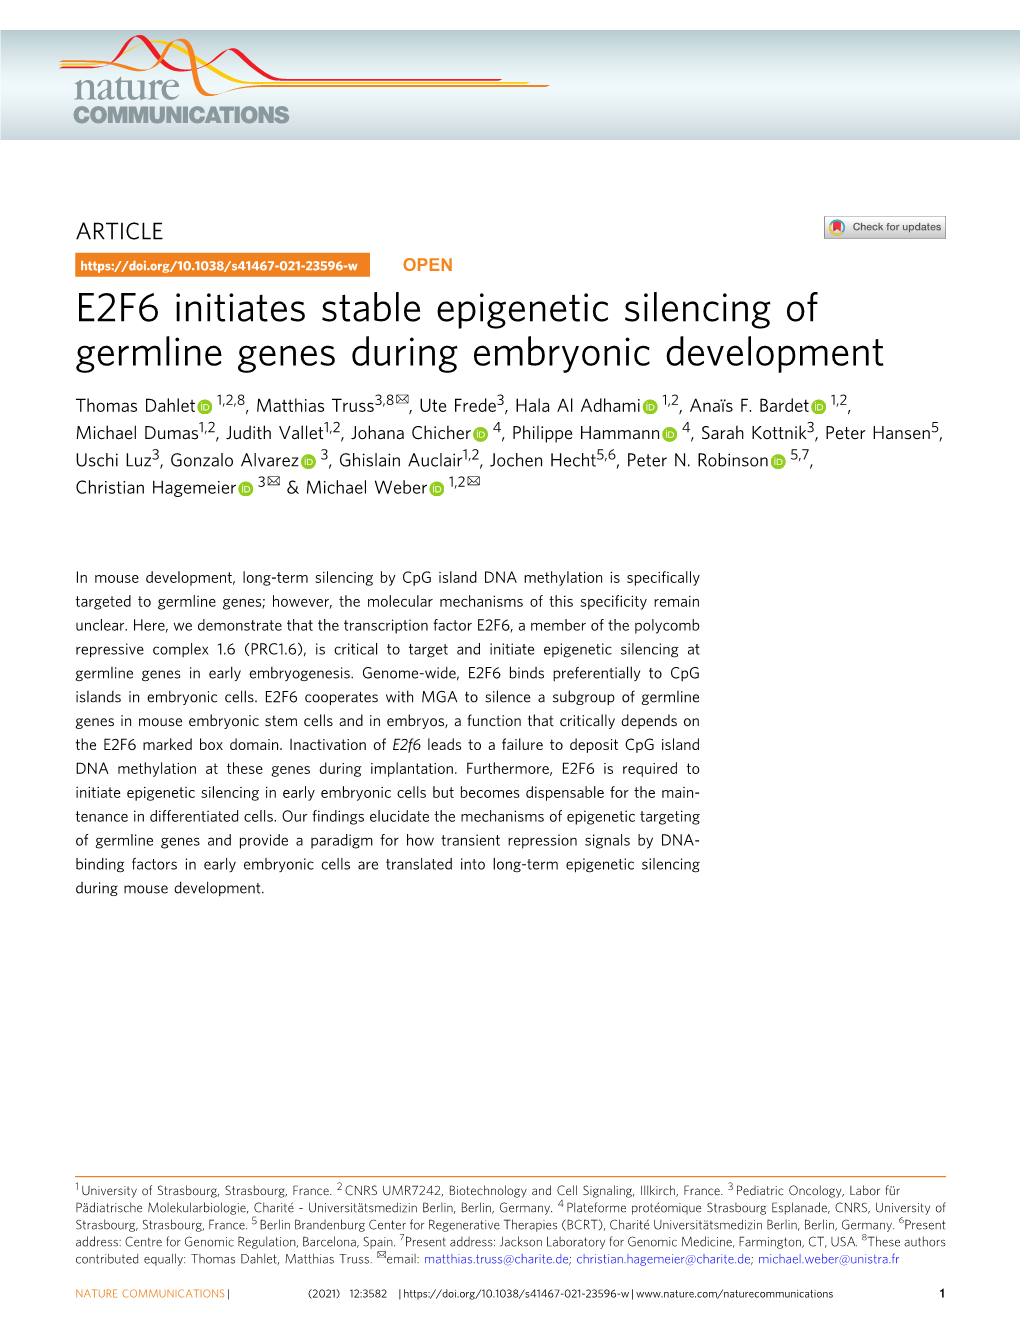 E2F6 Initiates Stable Epigenetic Silencing of Germline Genes During